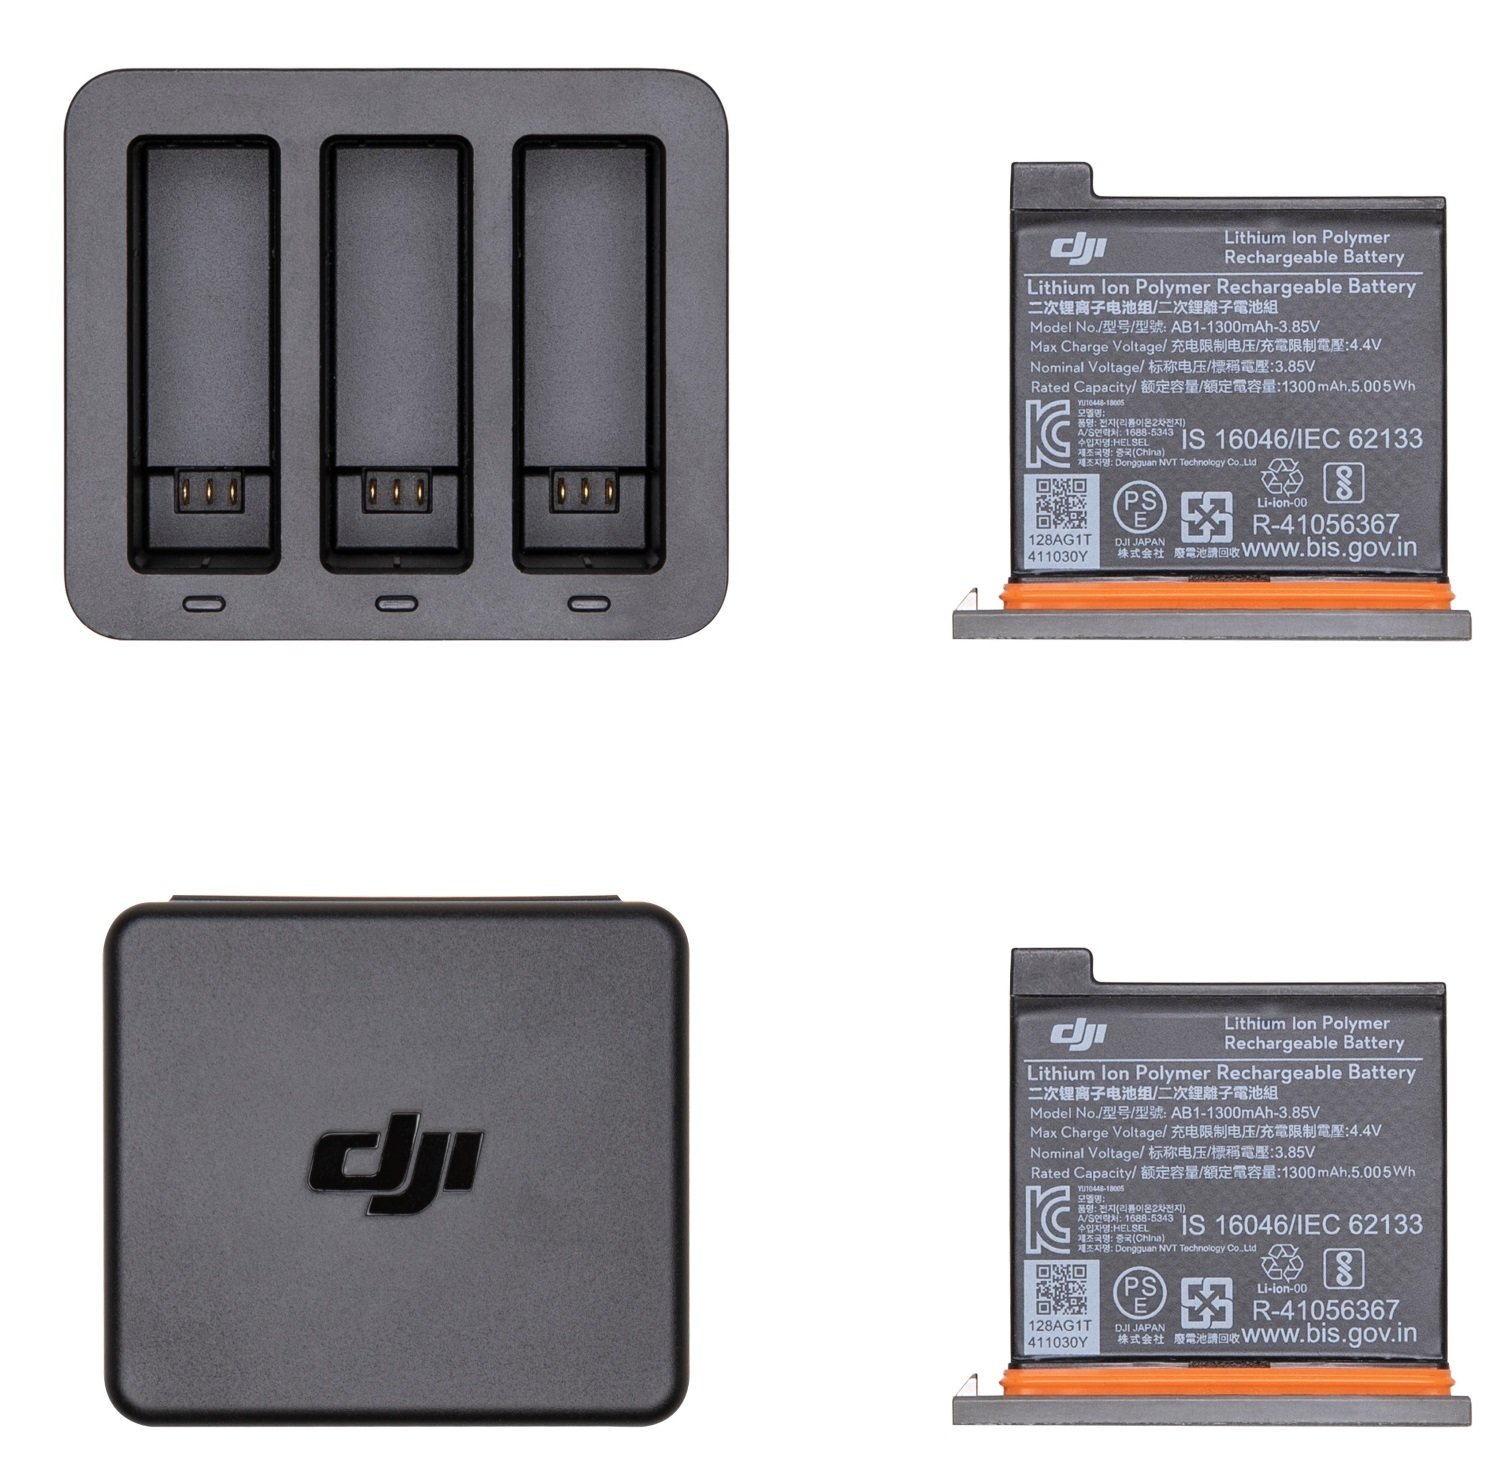 DJI Osmo Action Battery Charging Kit Review